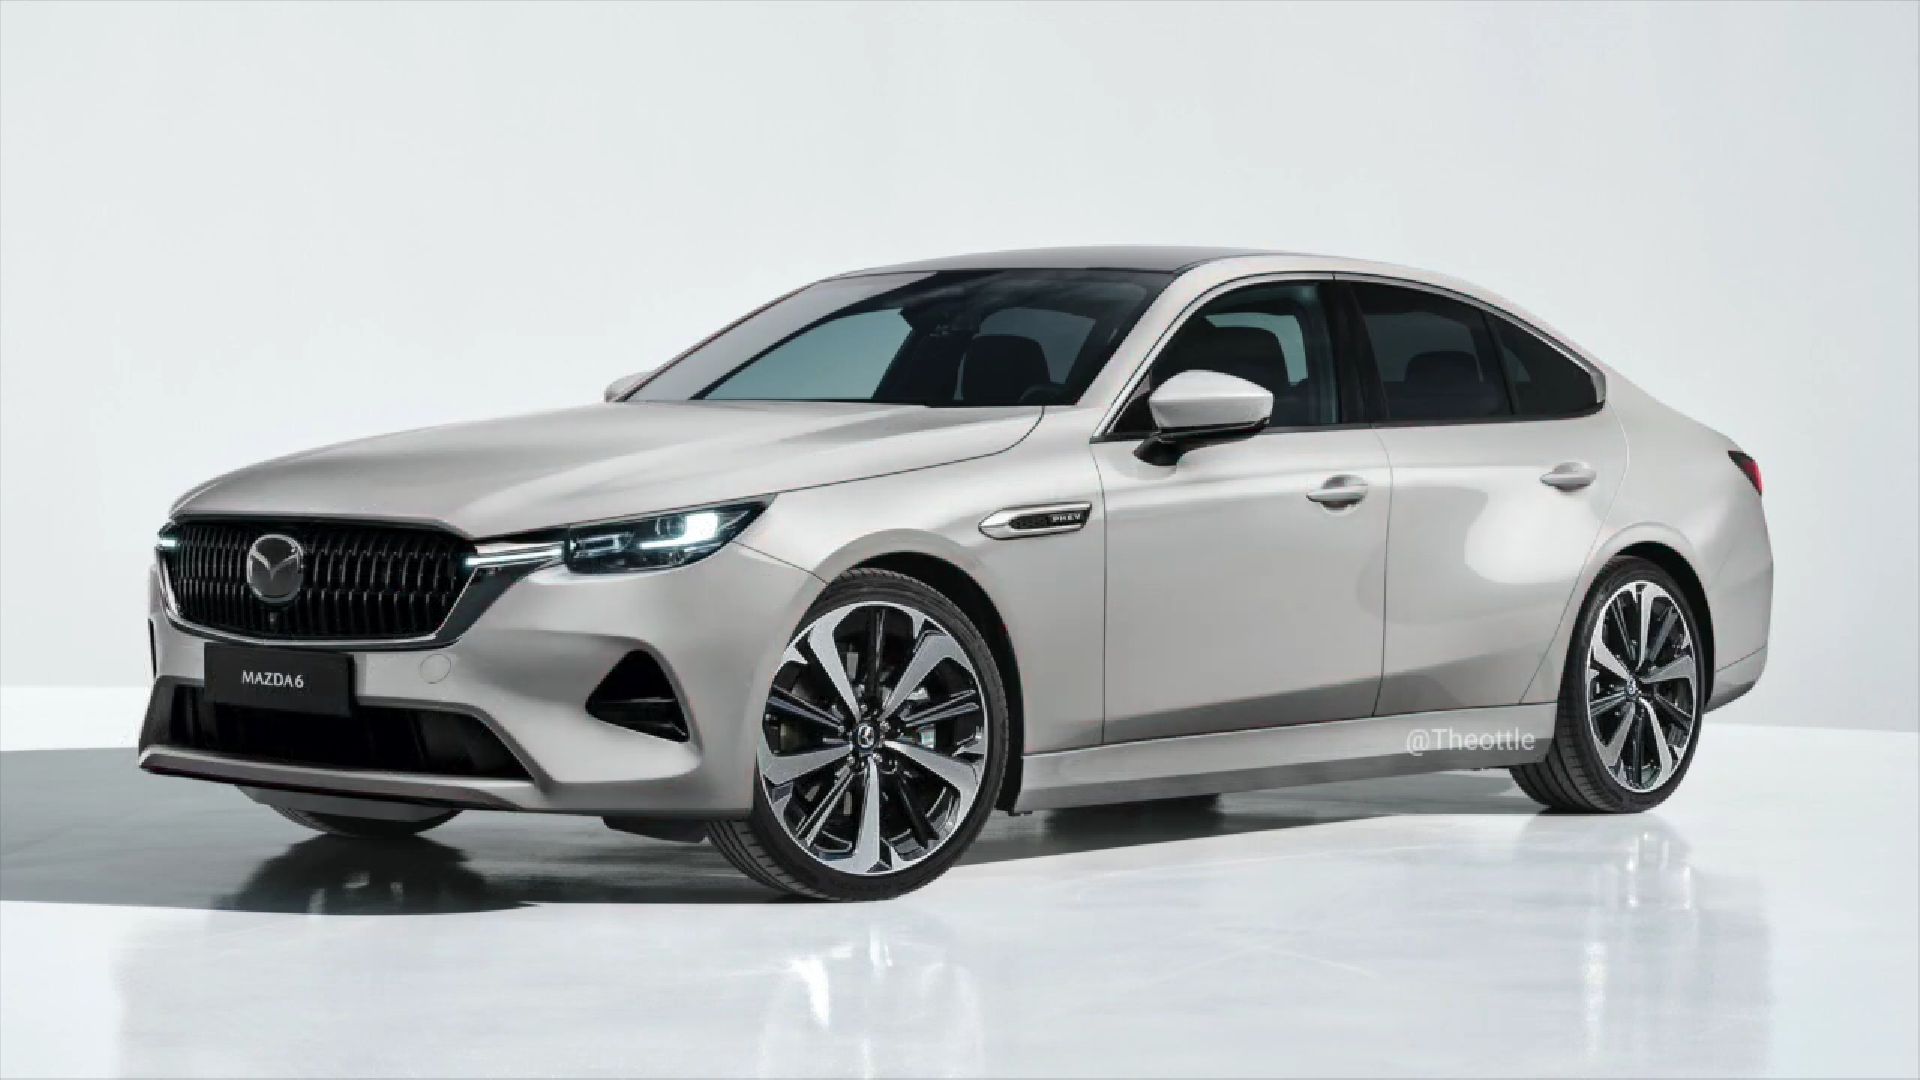 2025-mazda6-sedan-speculatively-rendered-new-generation-may-go-rwd-with-i6-engines-1.jpg